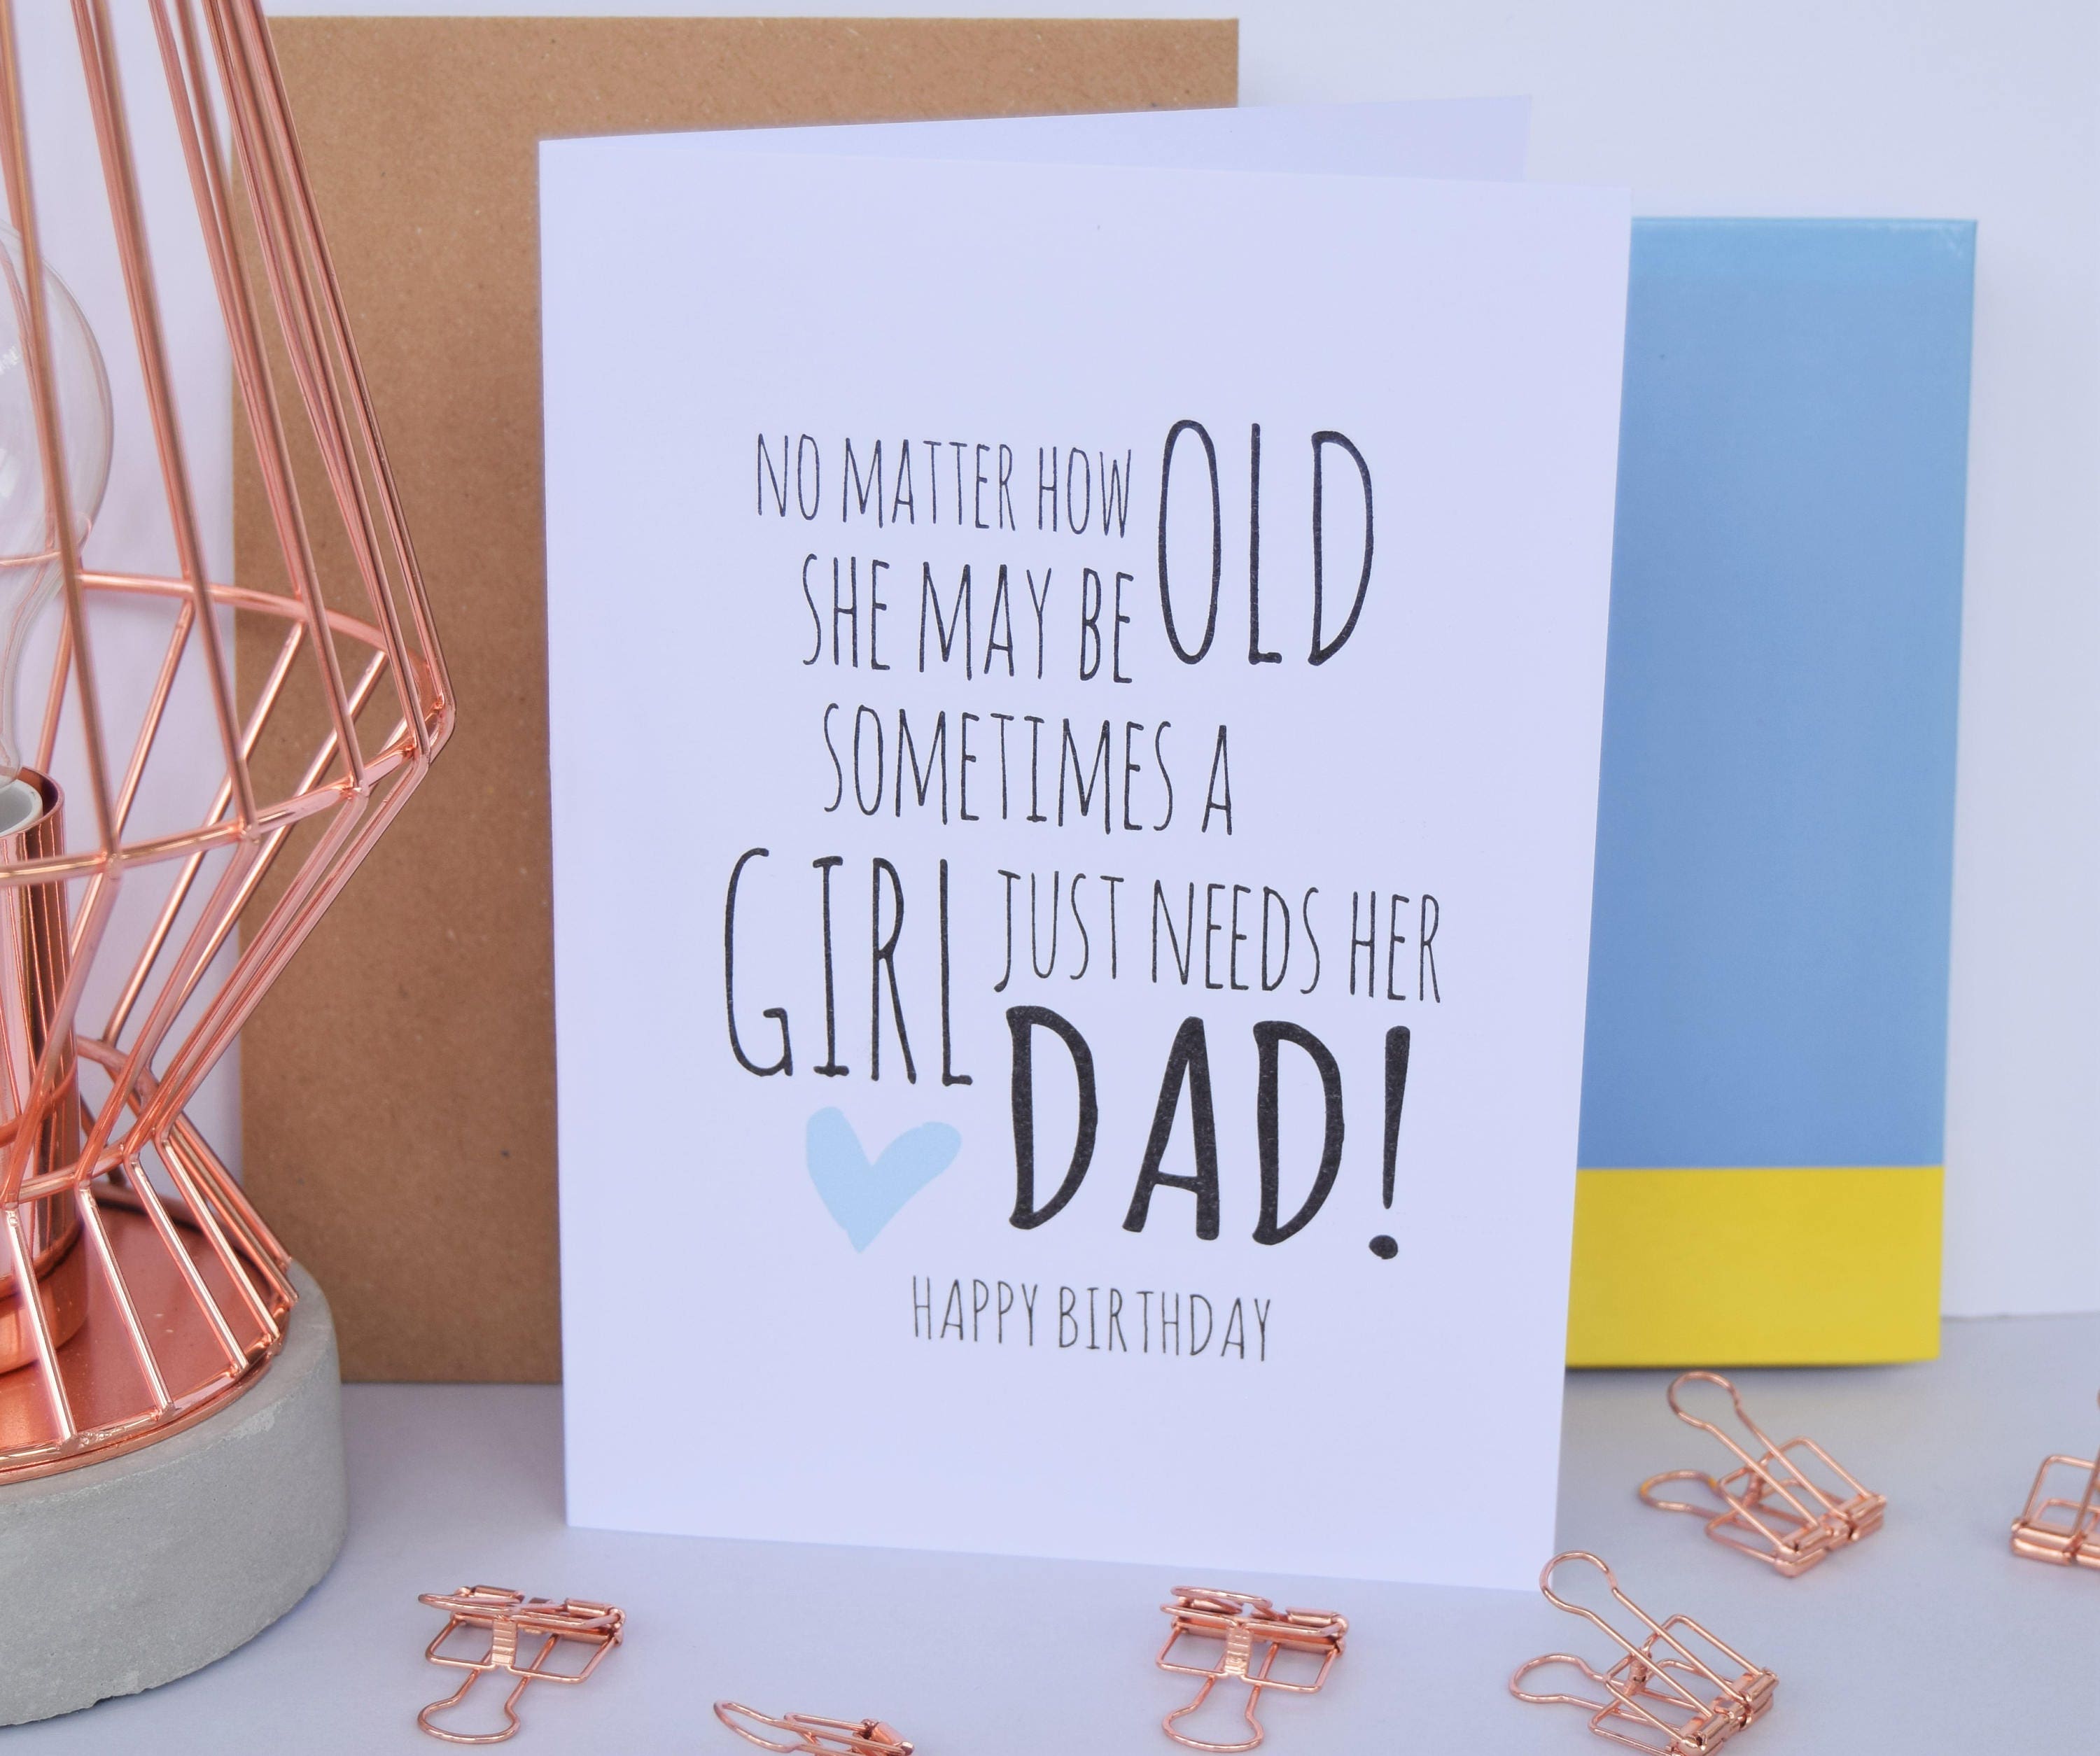 dad-birthday-card-a-girl-just-needs-her-dad-daughter-dad